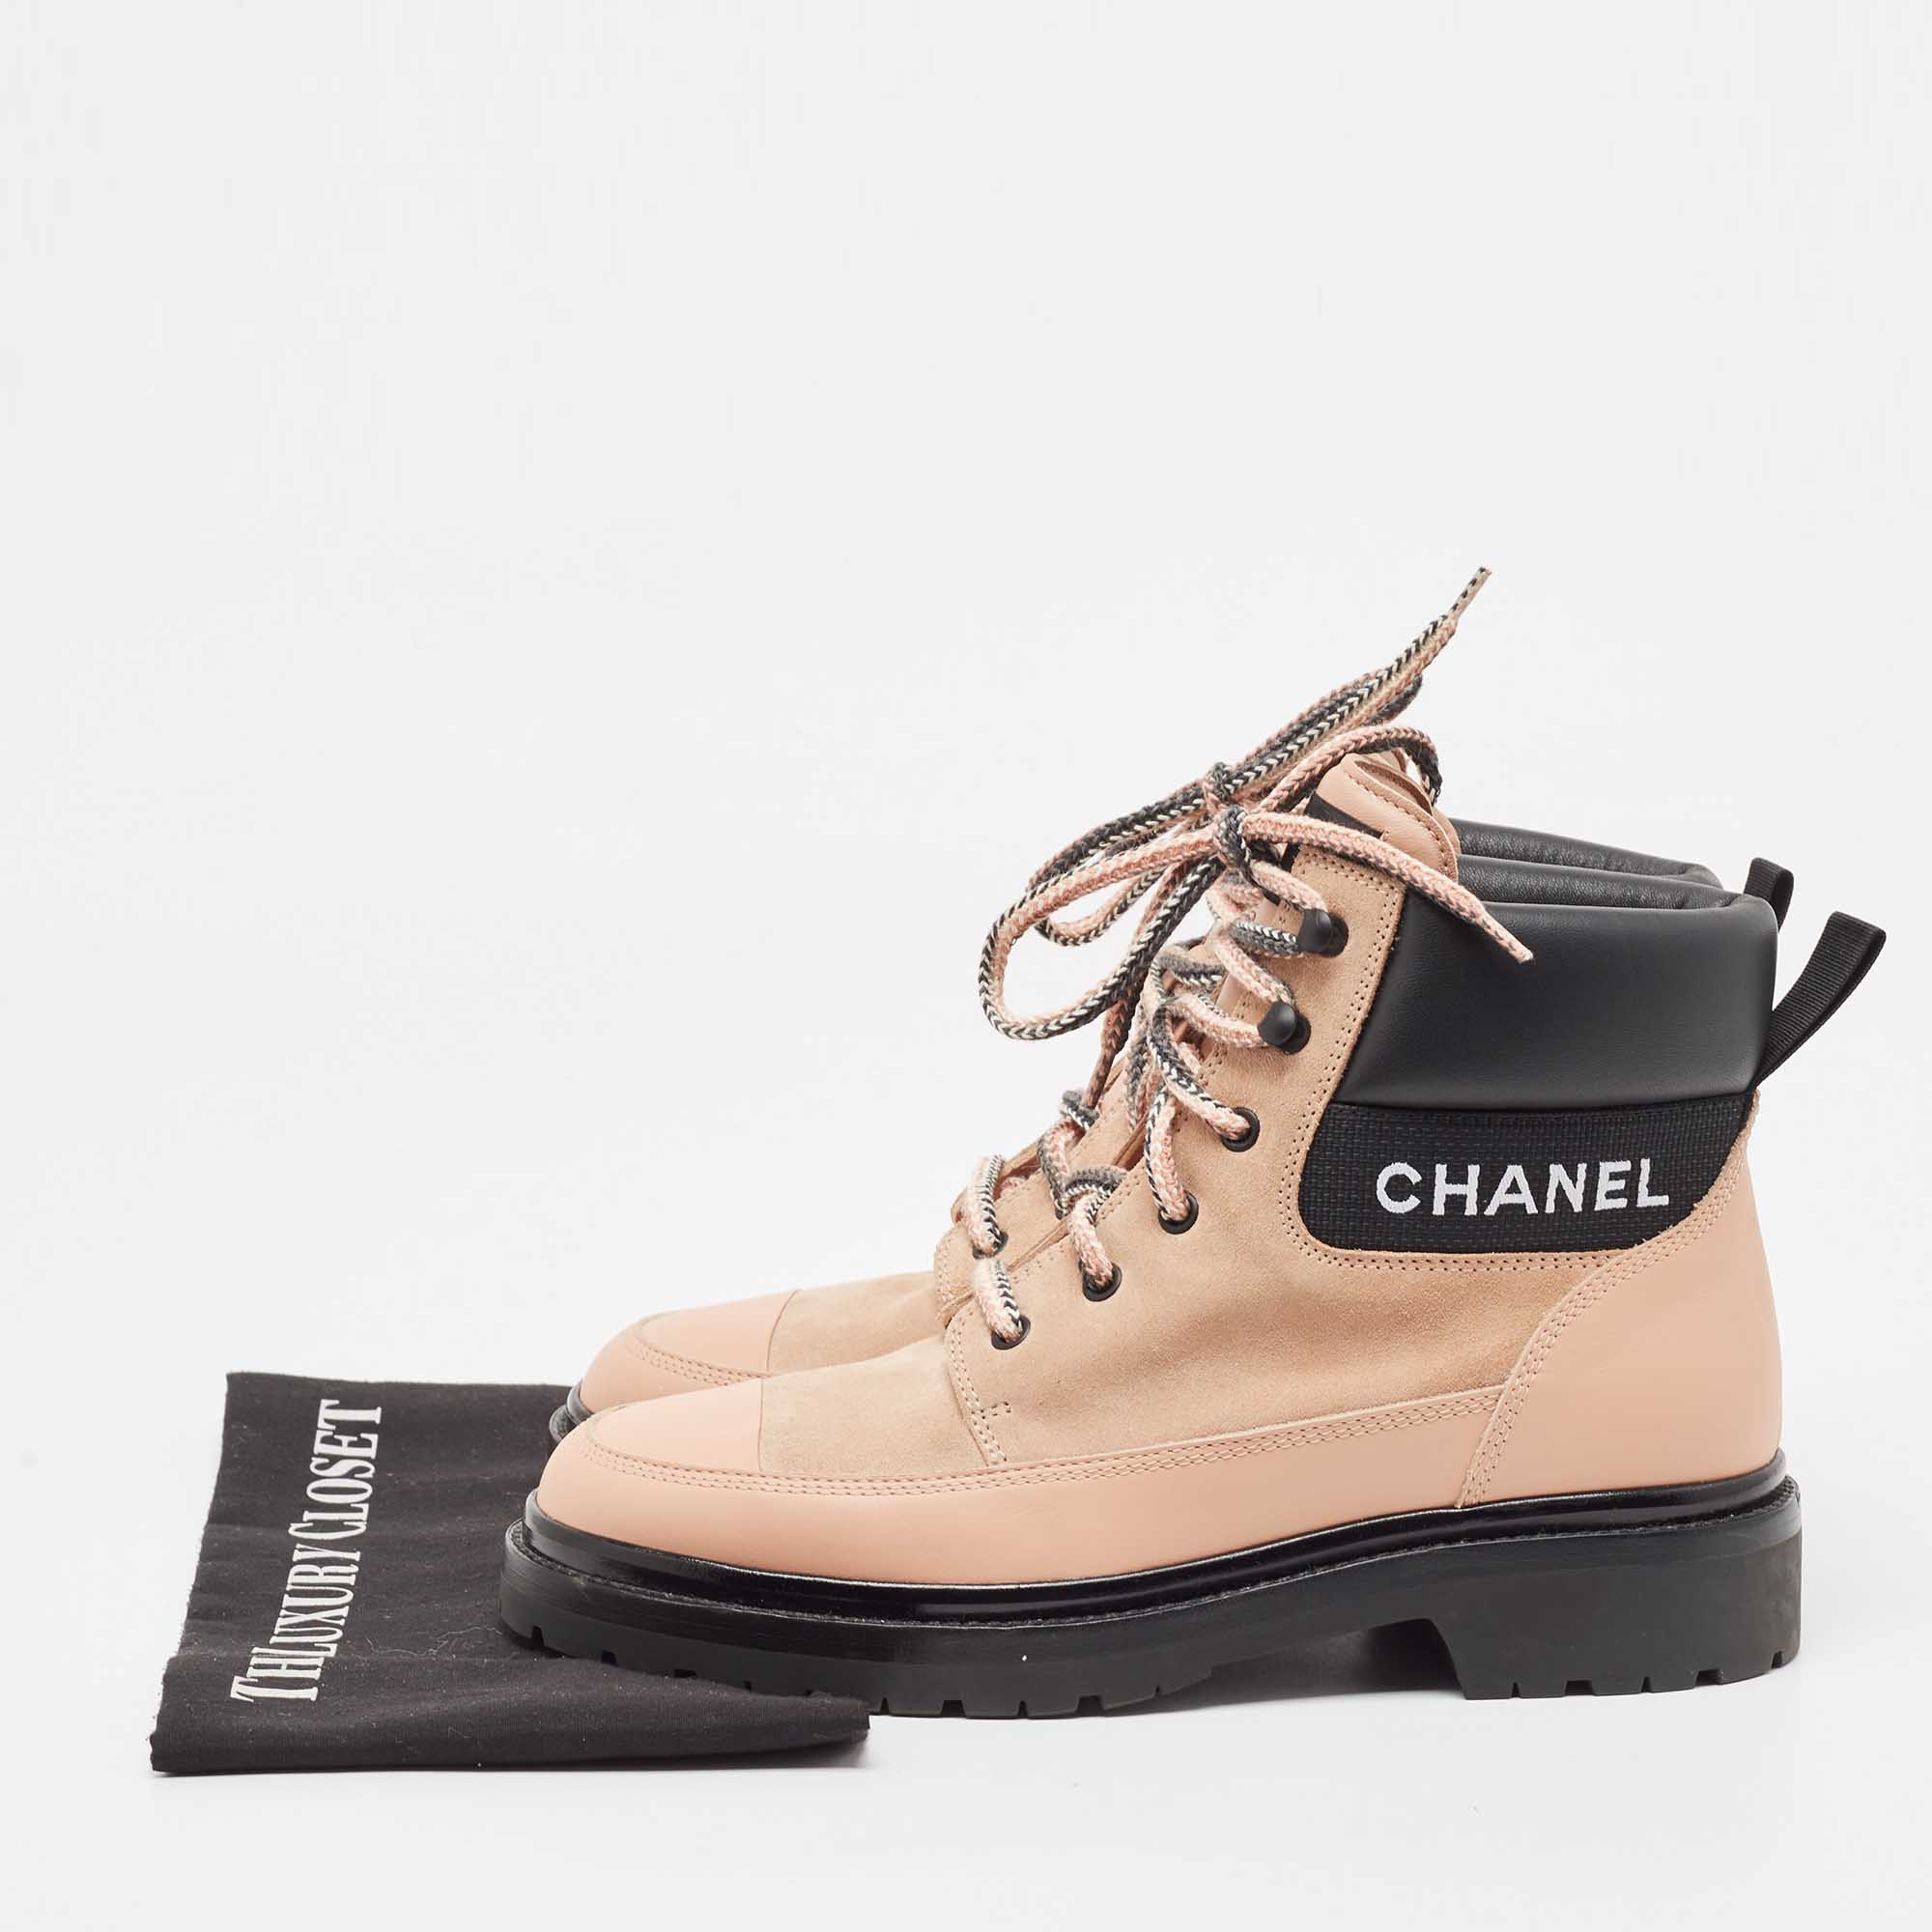 Chanel Pink/Black Leather And Suede Lace Up Ankle Boots Size 41